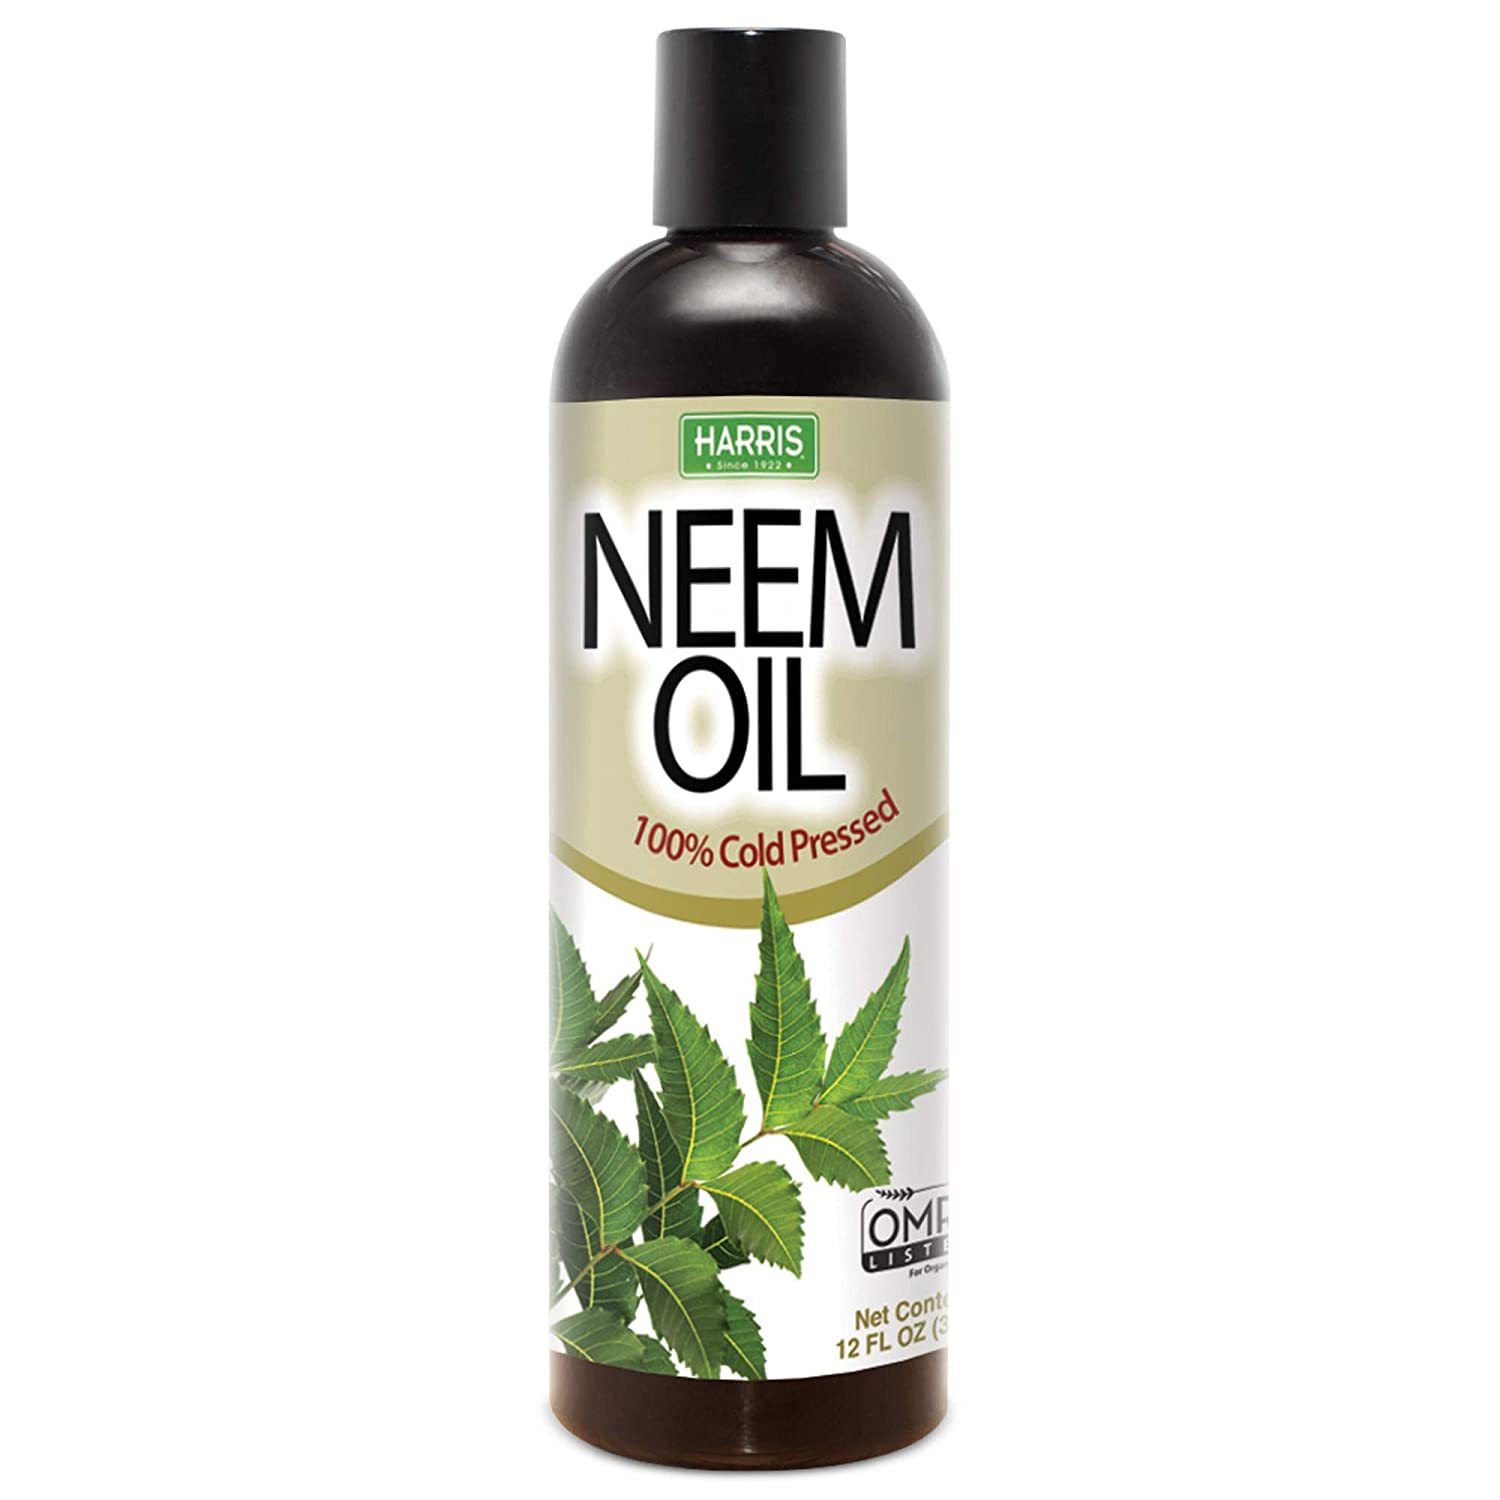 Copper Fungicide Vs. Neem Oil - Which Is The Better Option? - Belo Garden